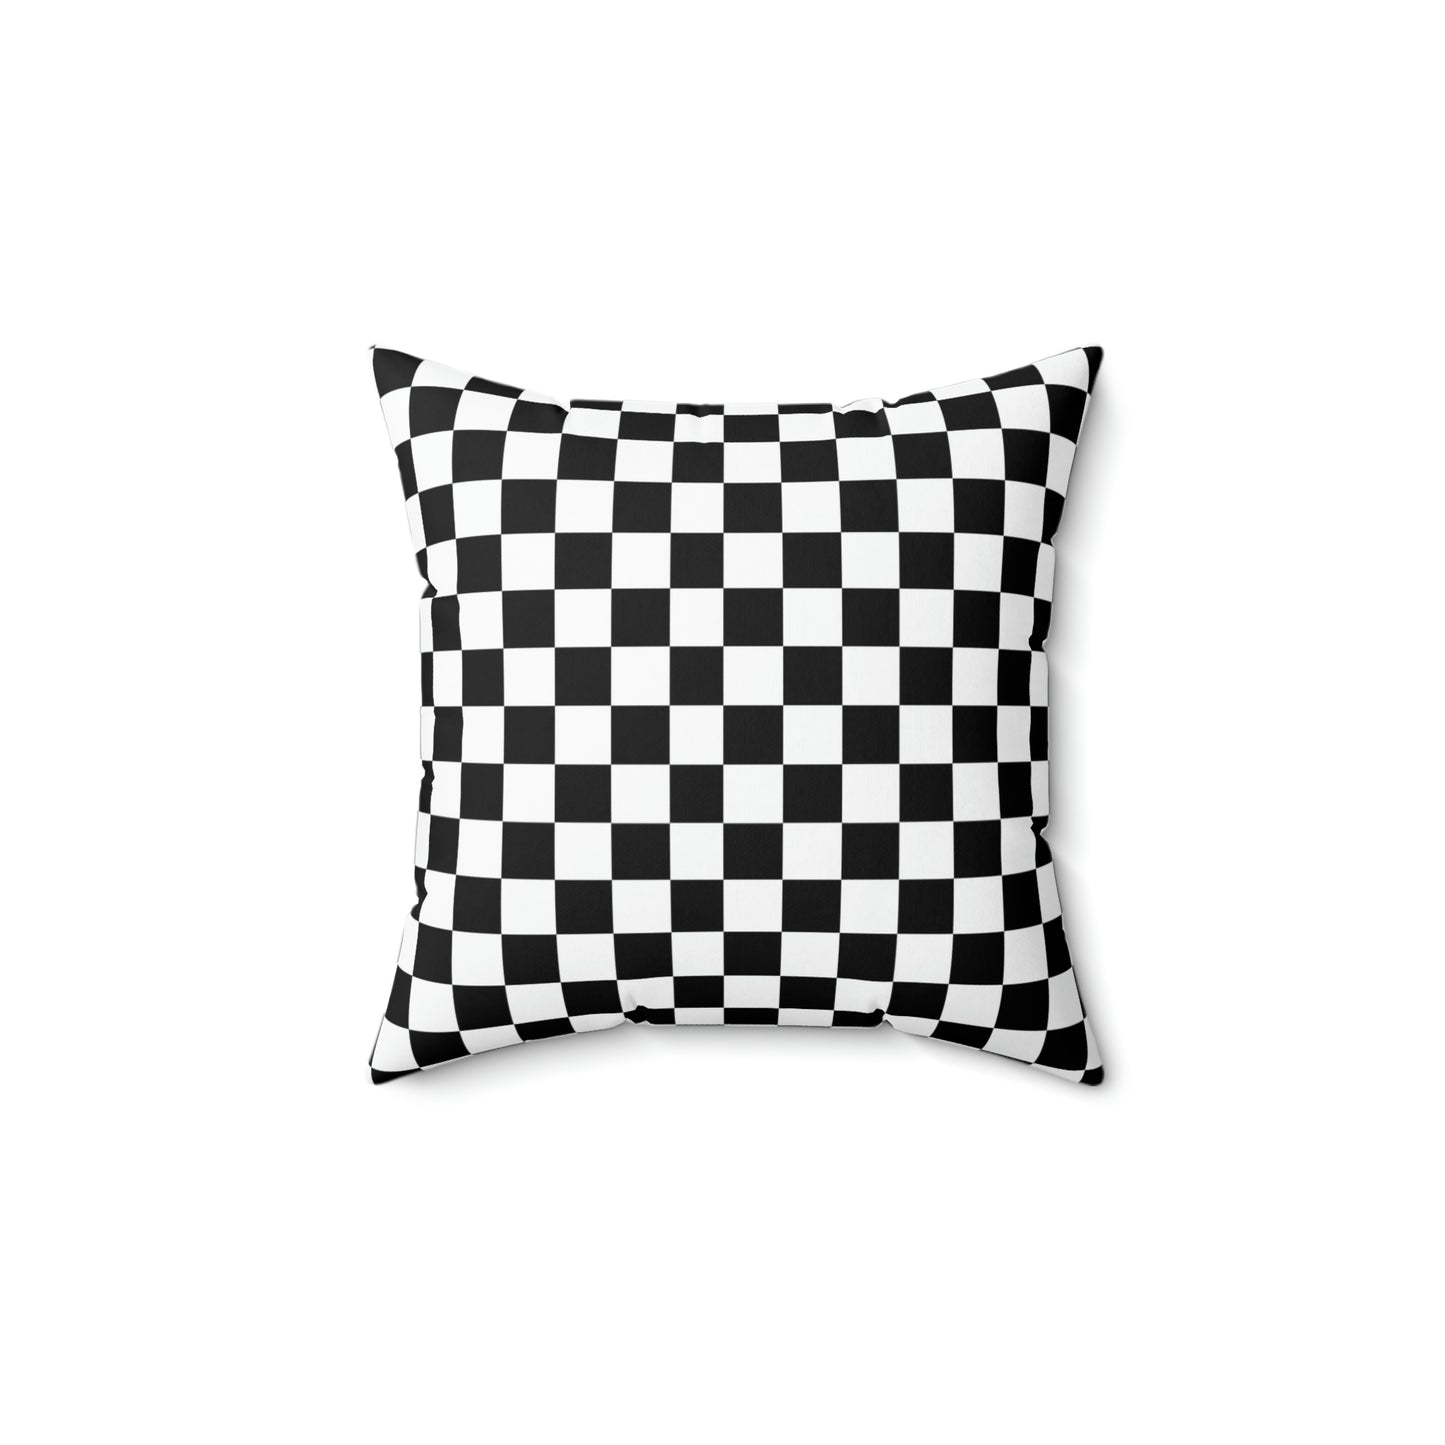 Checkerboard pattern Grey cat design Spun Polyester Square Indoor Pillow